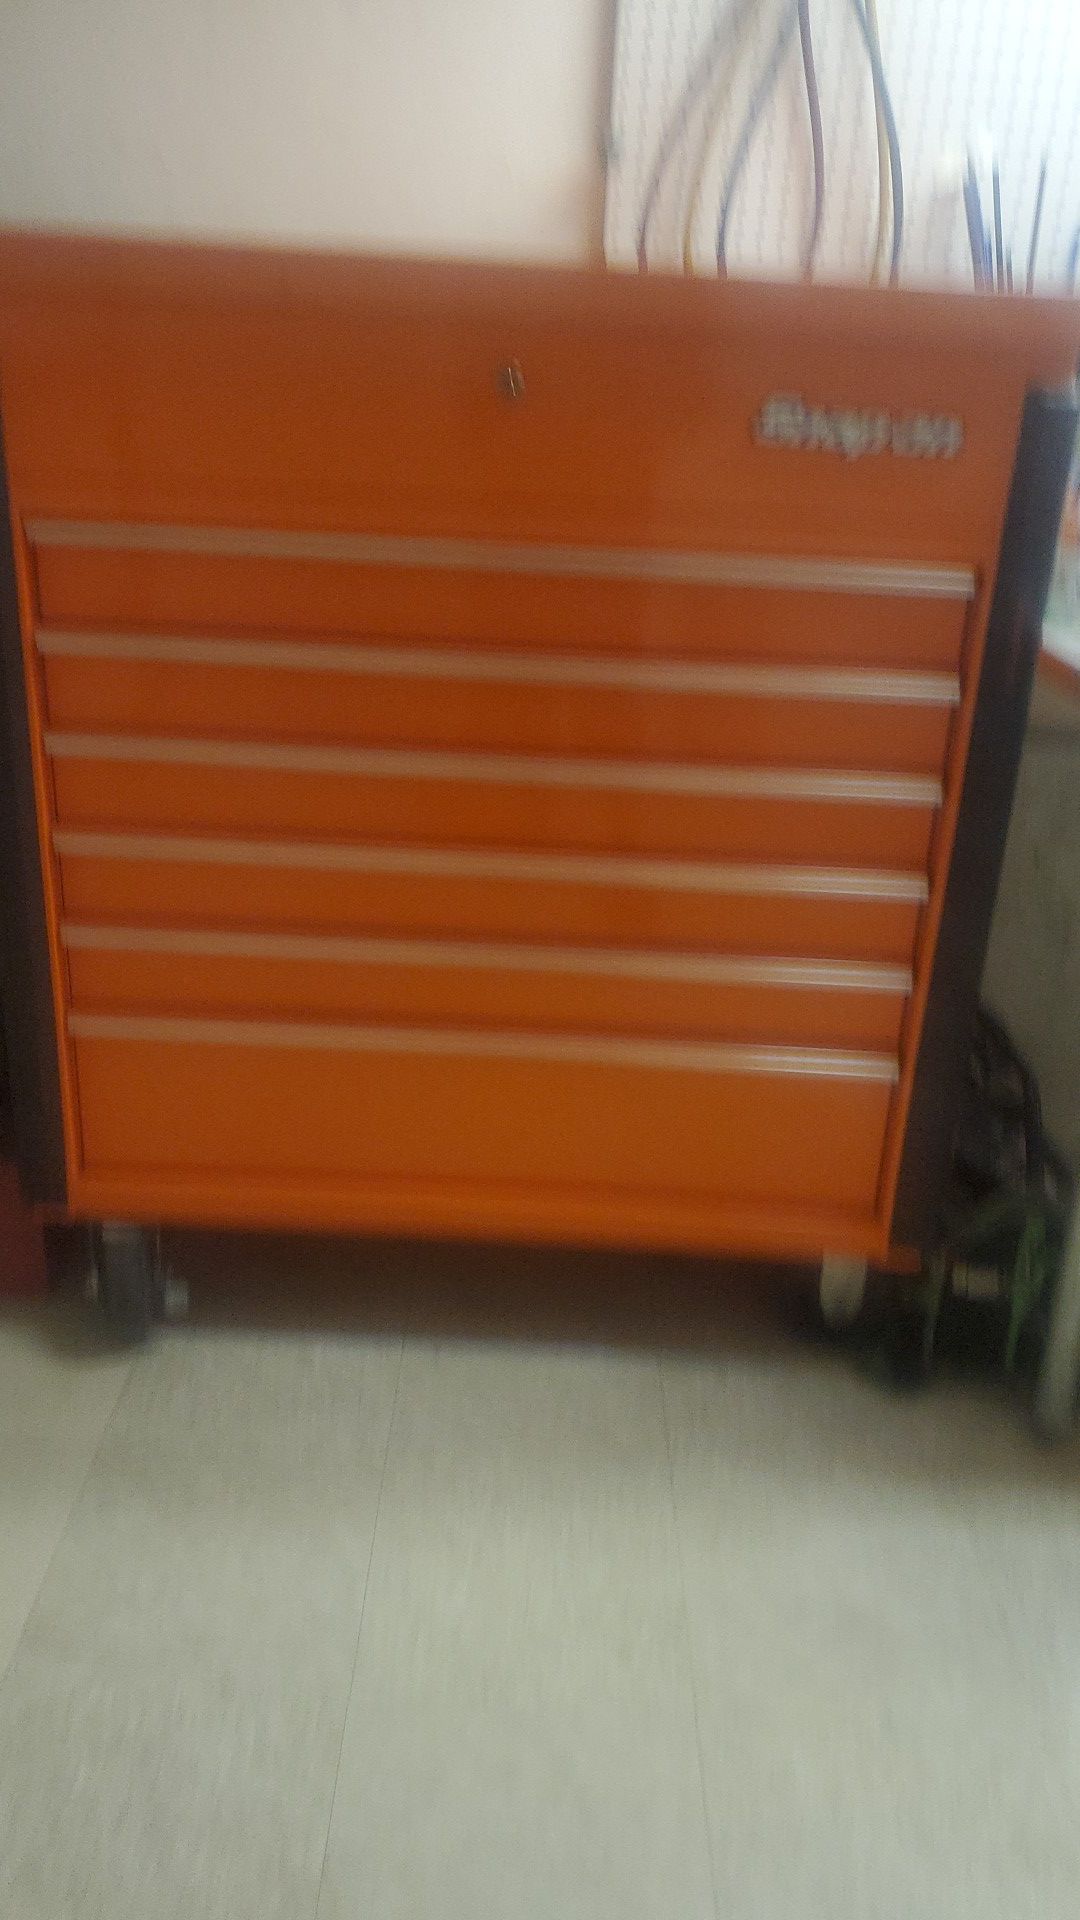 Snap on tool cart